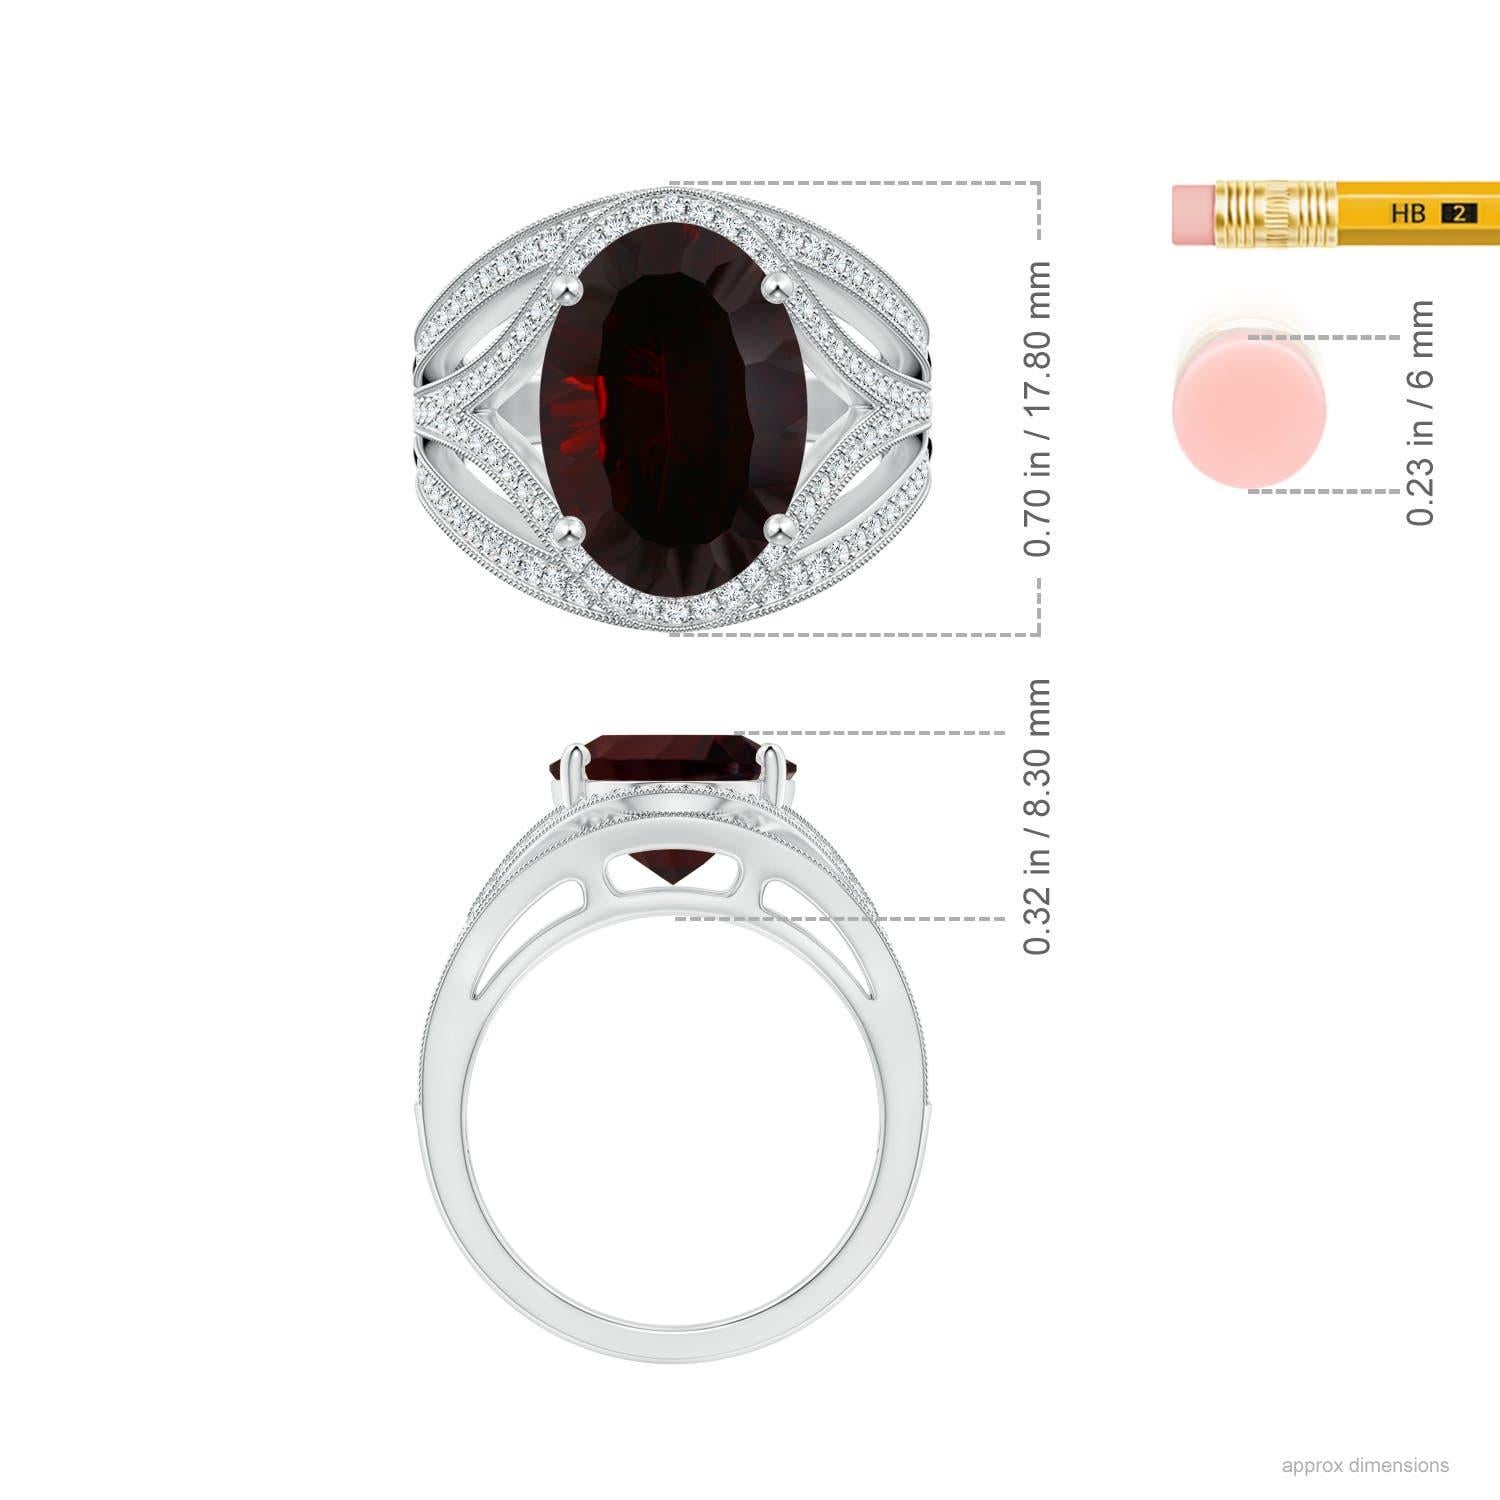 For Sale:  GIA Certified Natural Oval Garnet Ornate Shank Cocktail White Gold Ring 5